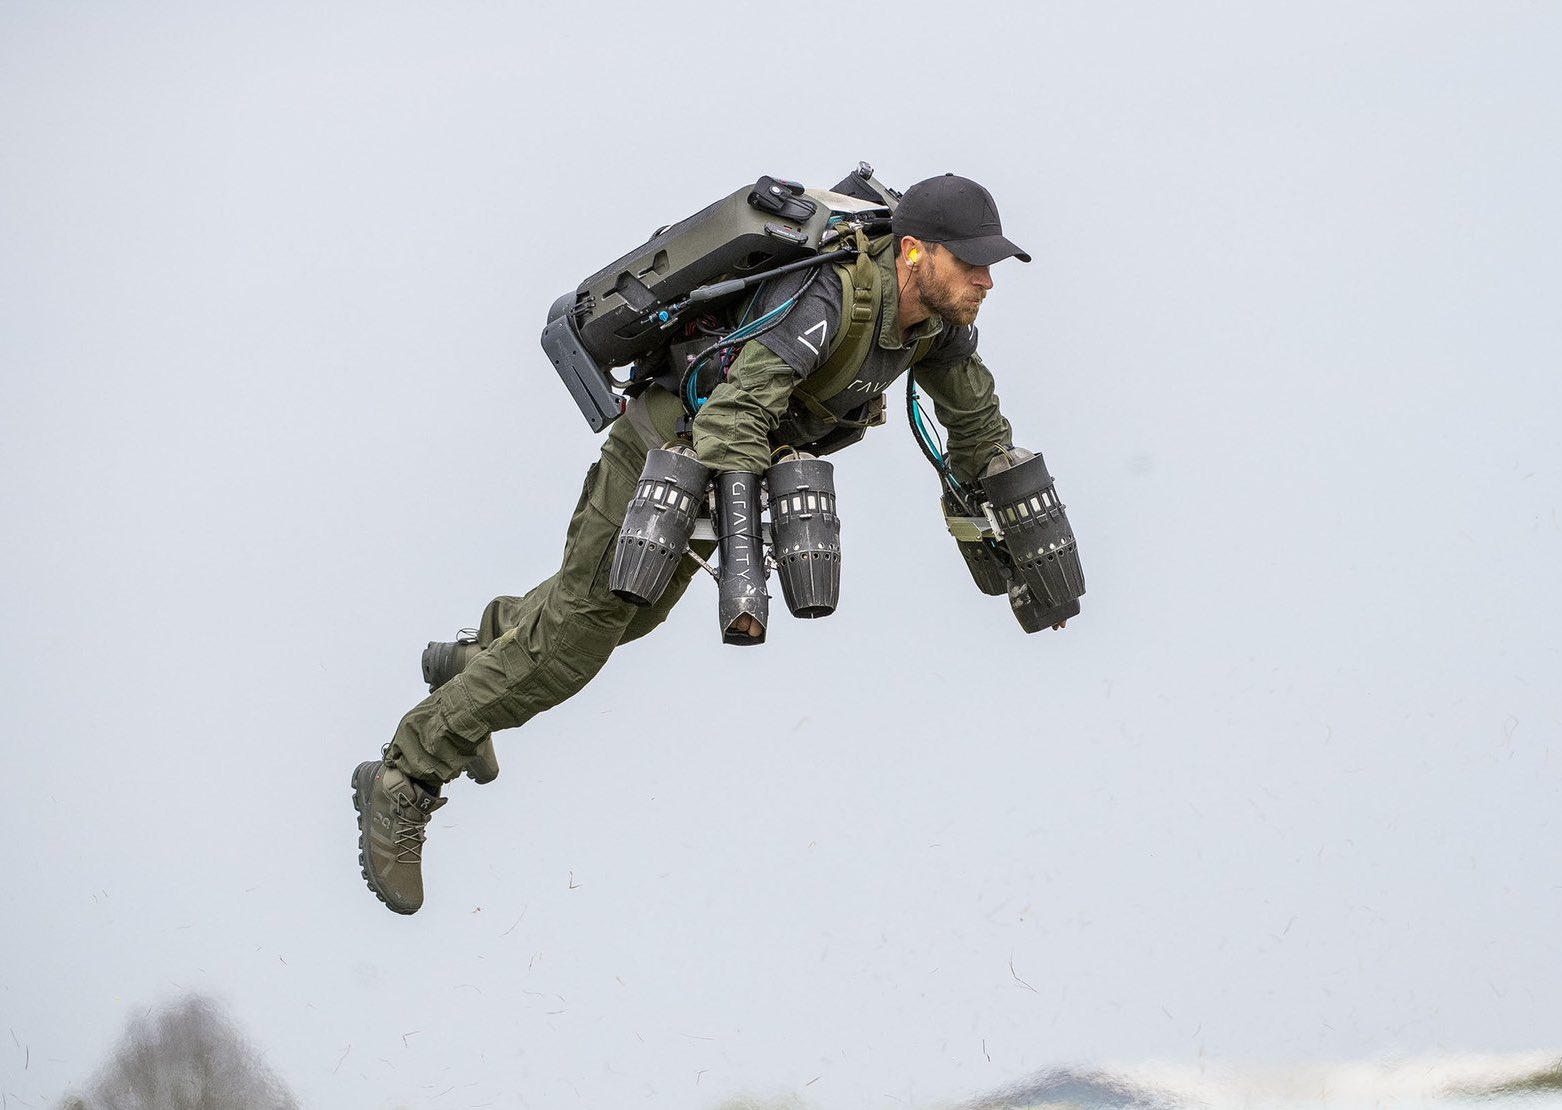 Gravity Founder Shows Off New Jet Pack By Flying Around Chicago